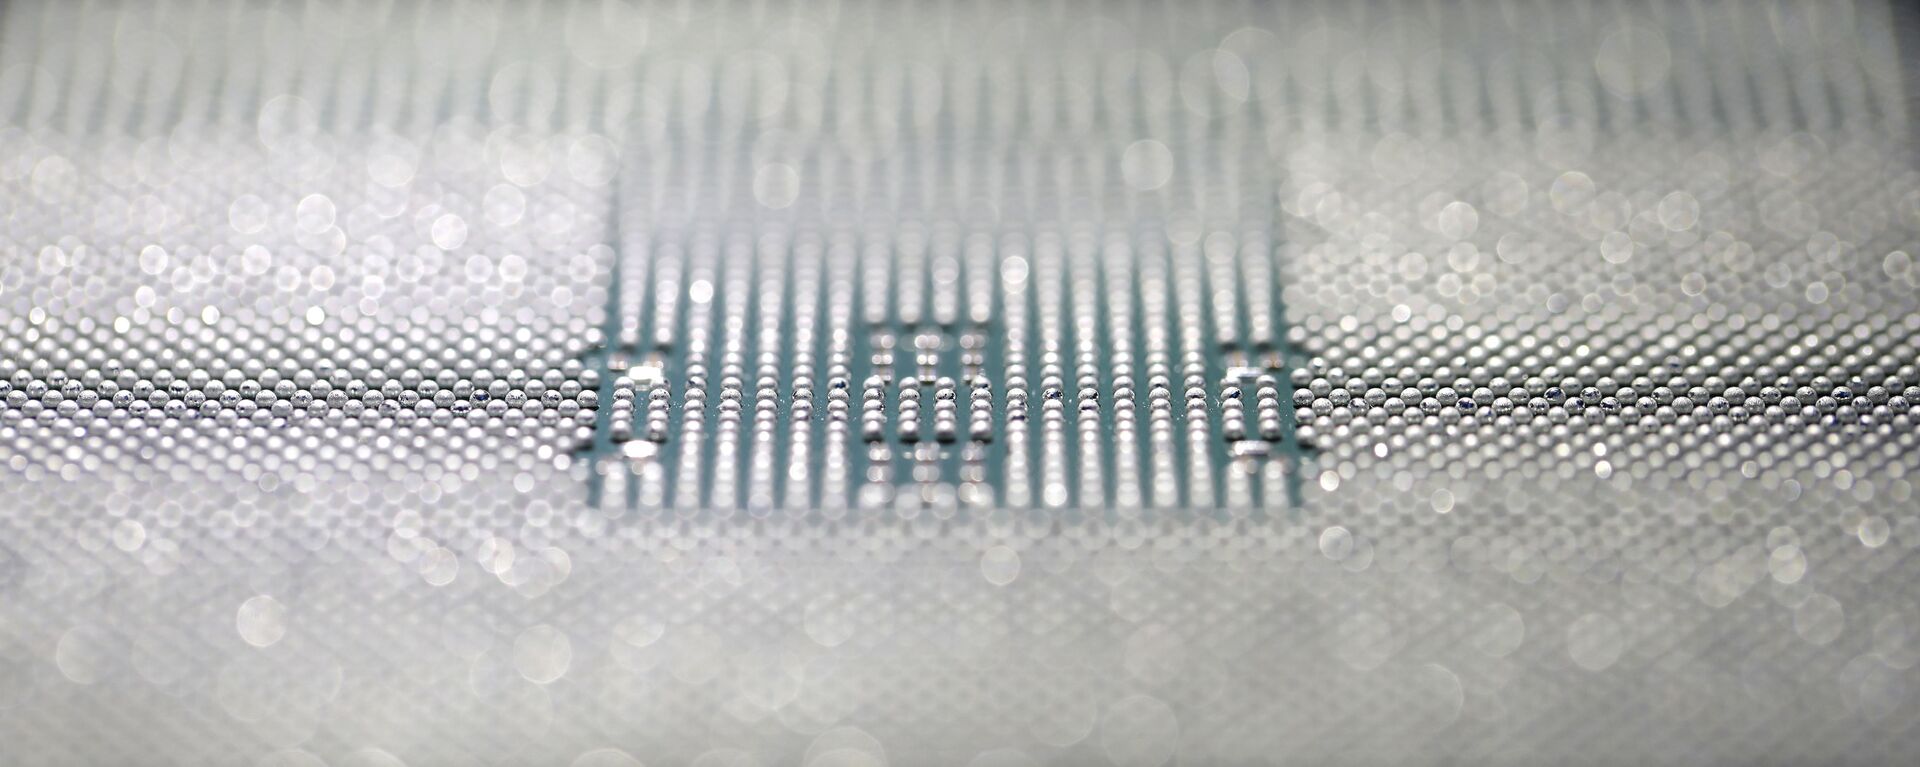 A Kunpeng 920 chip is displayed during an unveiling ceremony in Shenzhen, China, Monday, Jan. 7, 2019. Chinese telecom giant Huawei unveiled a processor chip for data centers and cloud computing as it expands into an emerging global market despite Western warnings the company might be a security risk.  - Sputnik International, 1920, 01.09.2022